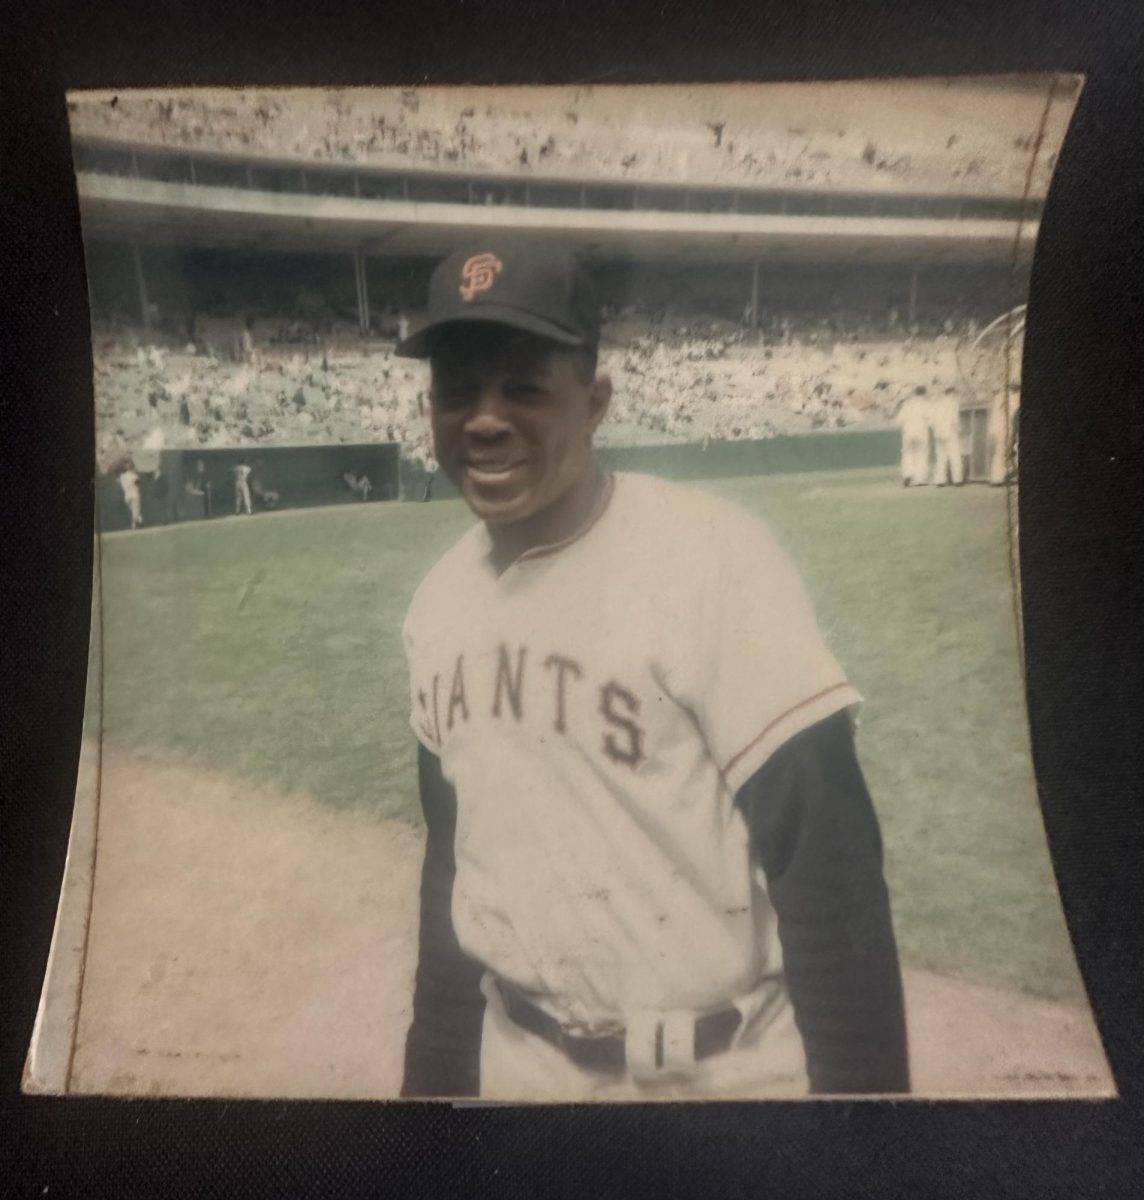 Willie Mays was an American icon who is often considered to be one of the greatest baseball players to ever live. This photo was taken at Candlestick Park in 1966 by Marie Weiss, grandmother of The Crusader adviser Susan Sutton. 